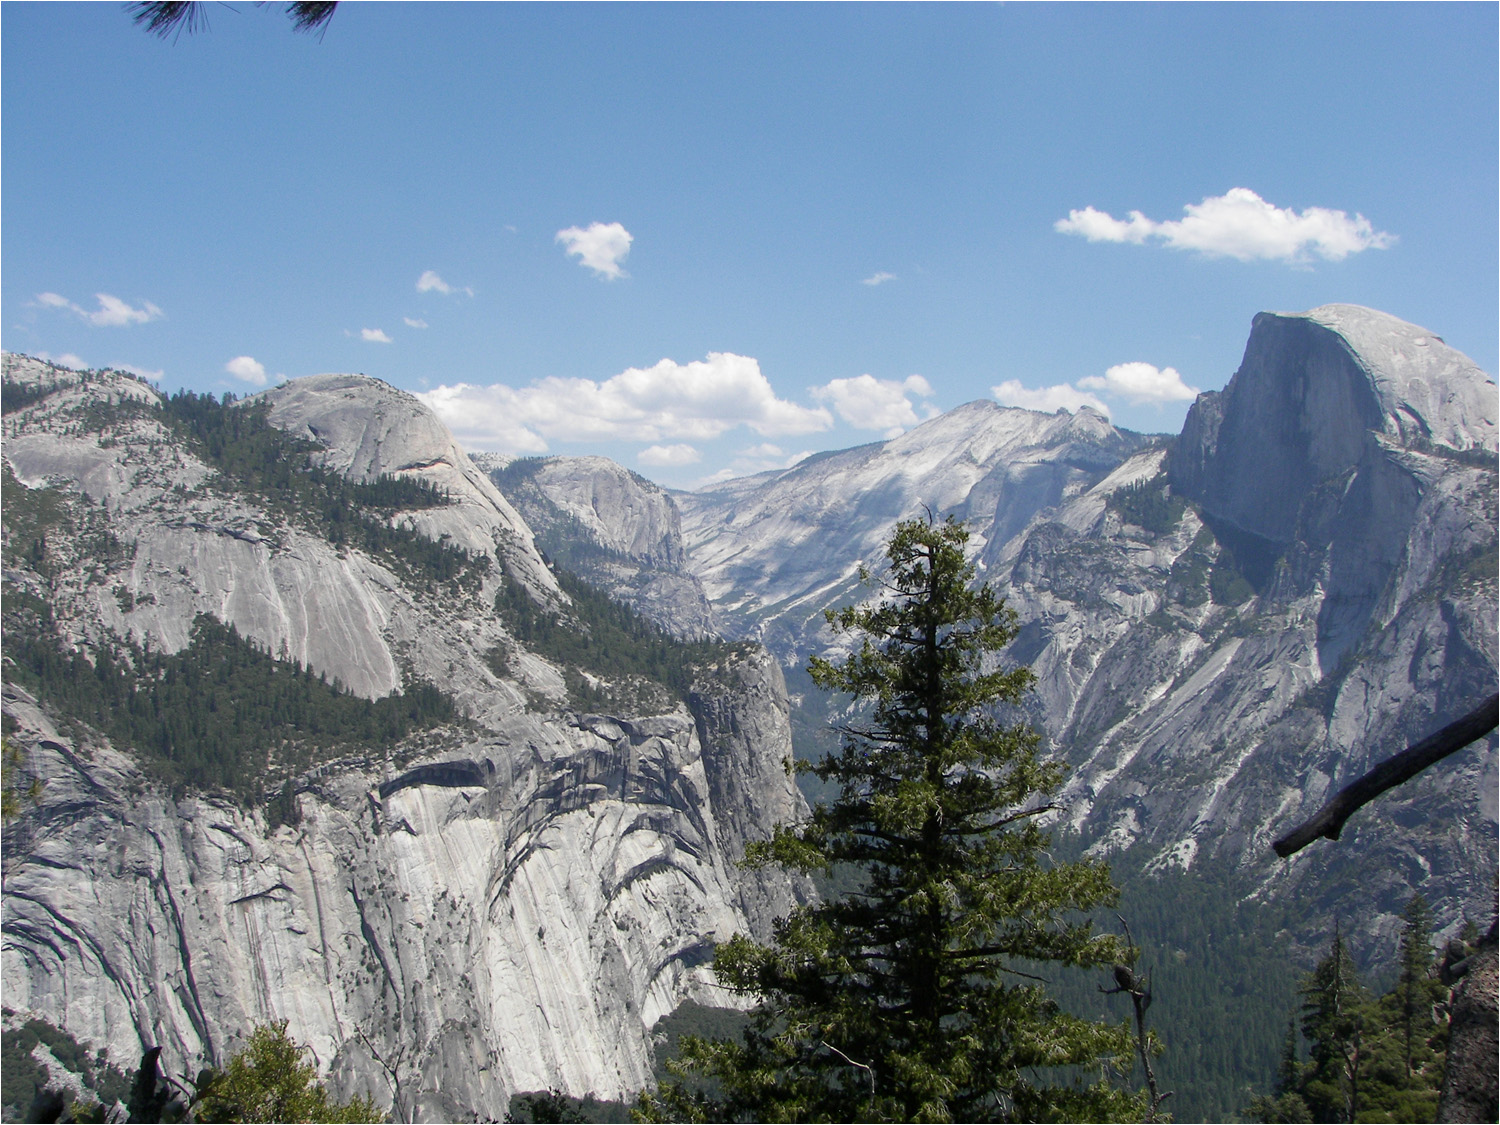 Glacier Point Hike-First views of Half Dome from trail